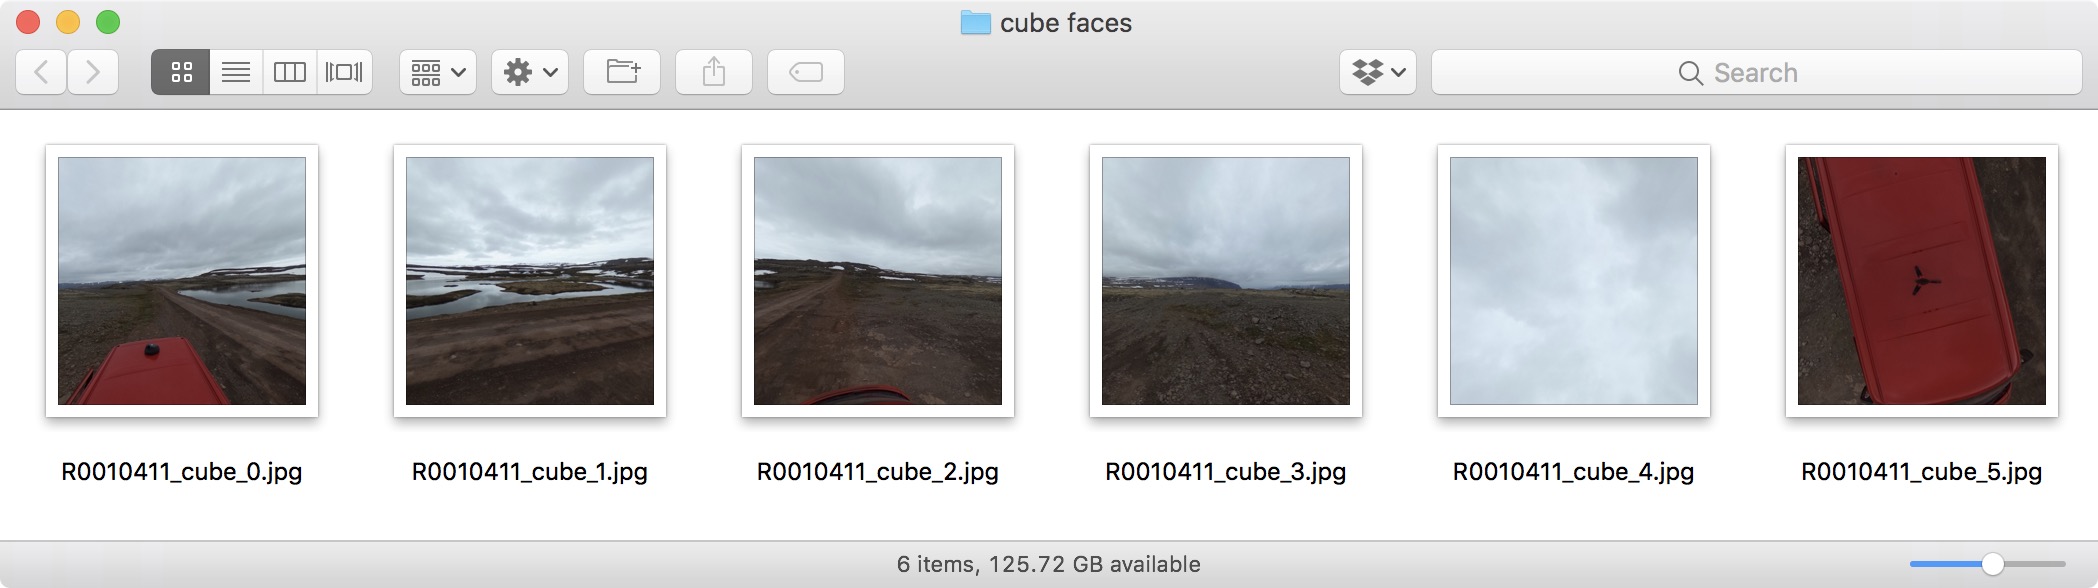 Cube Face Naming Convention